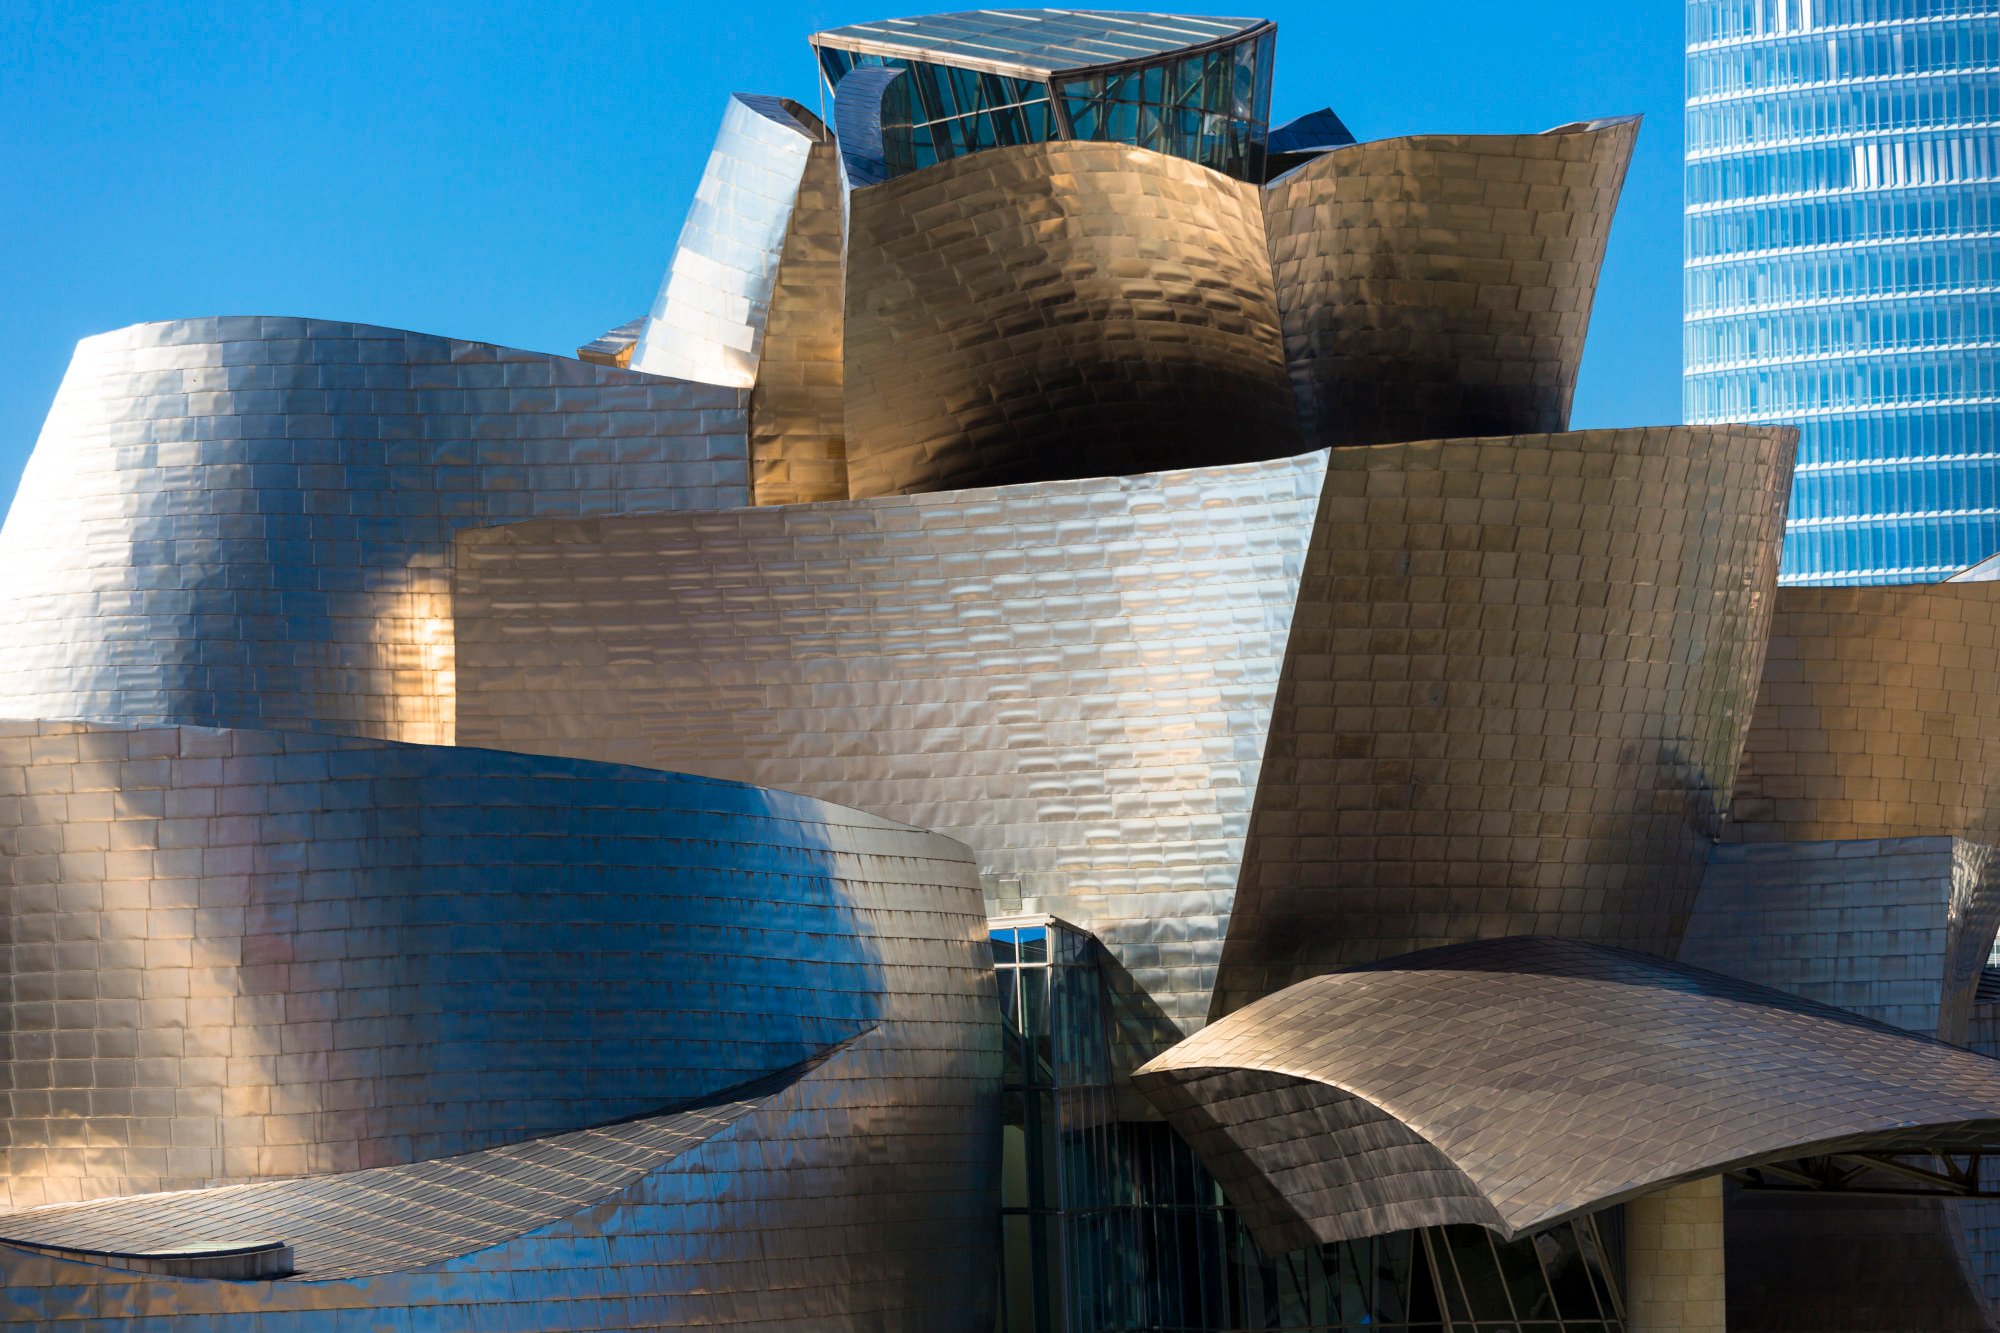 The Guggenheim, designed by architect Frank Gehry available as